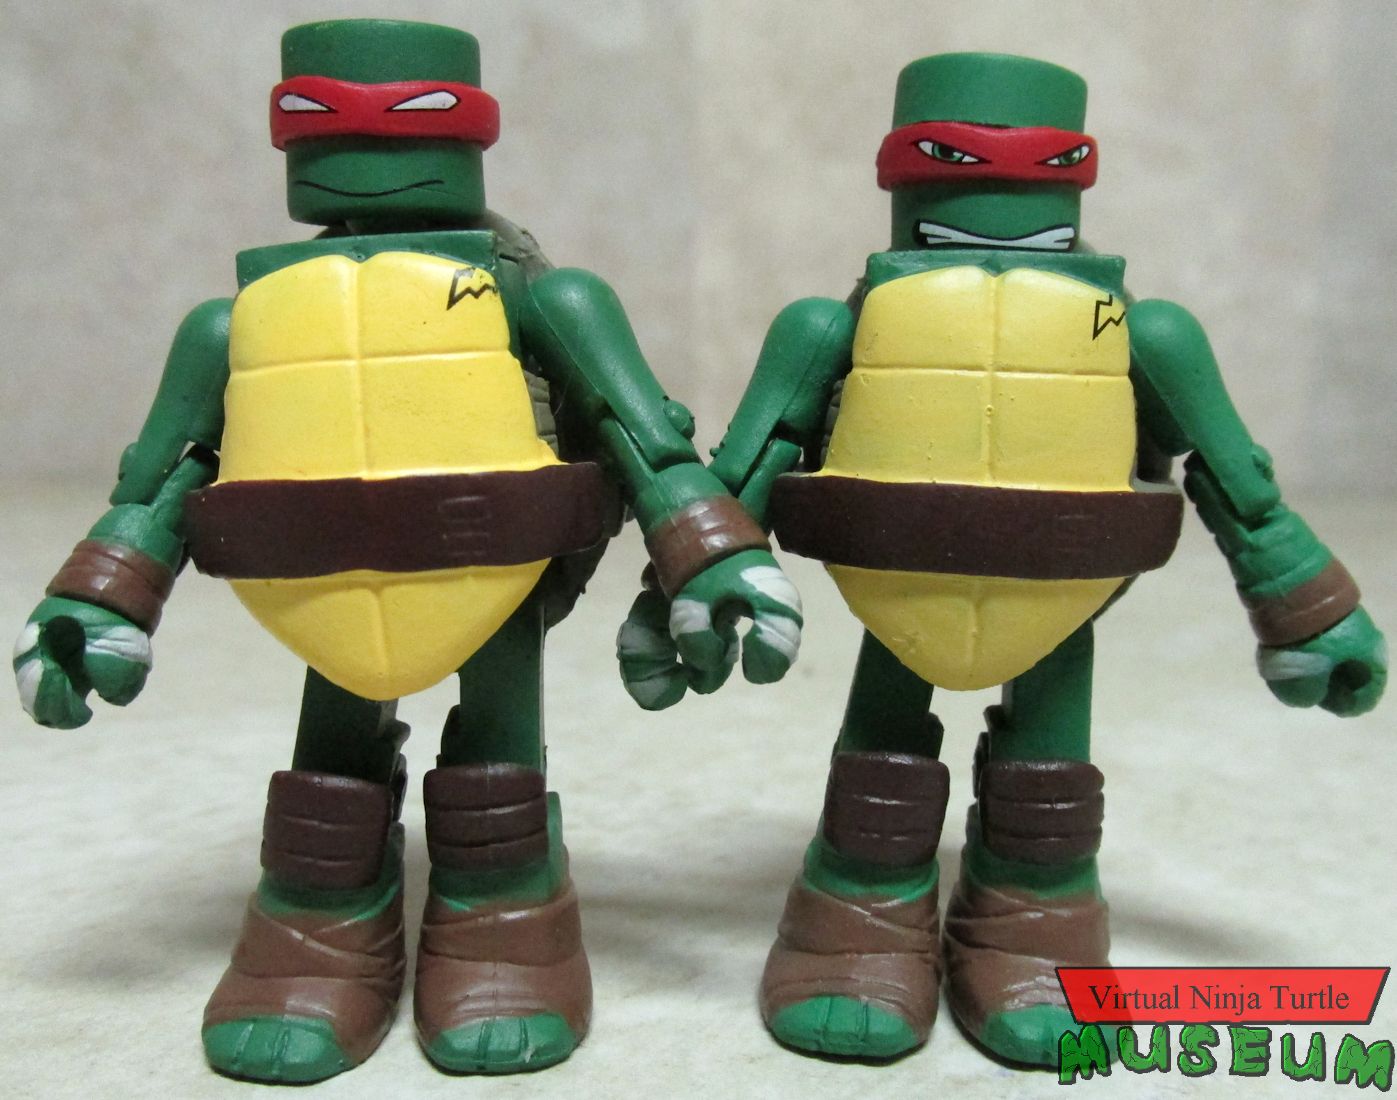 Series one and series two Raphael